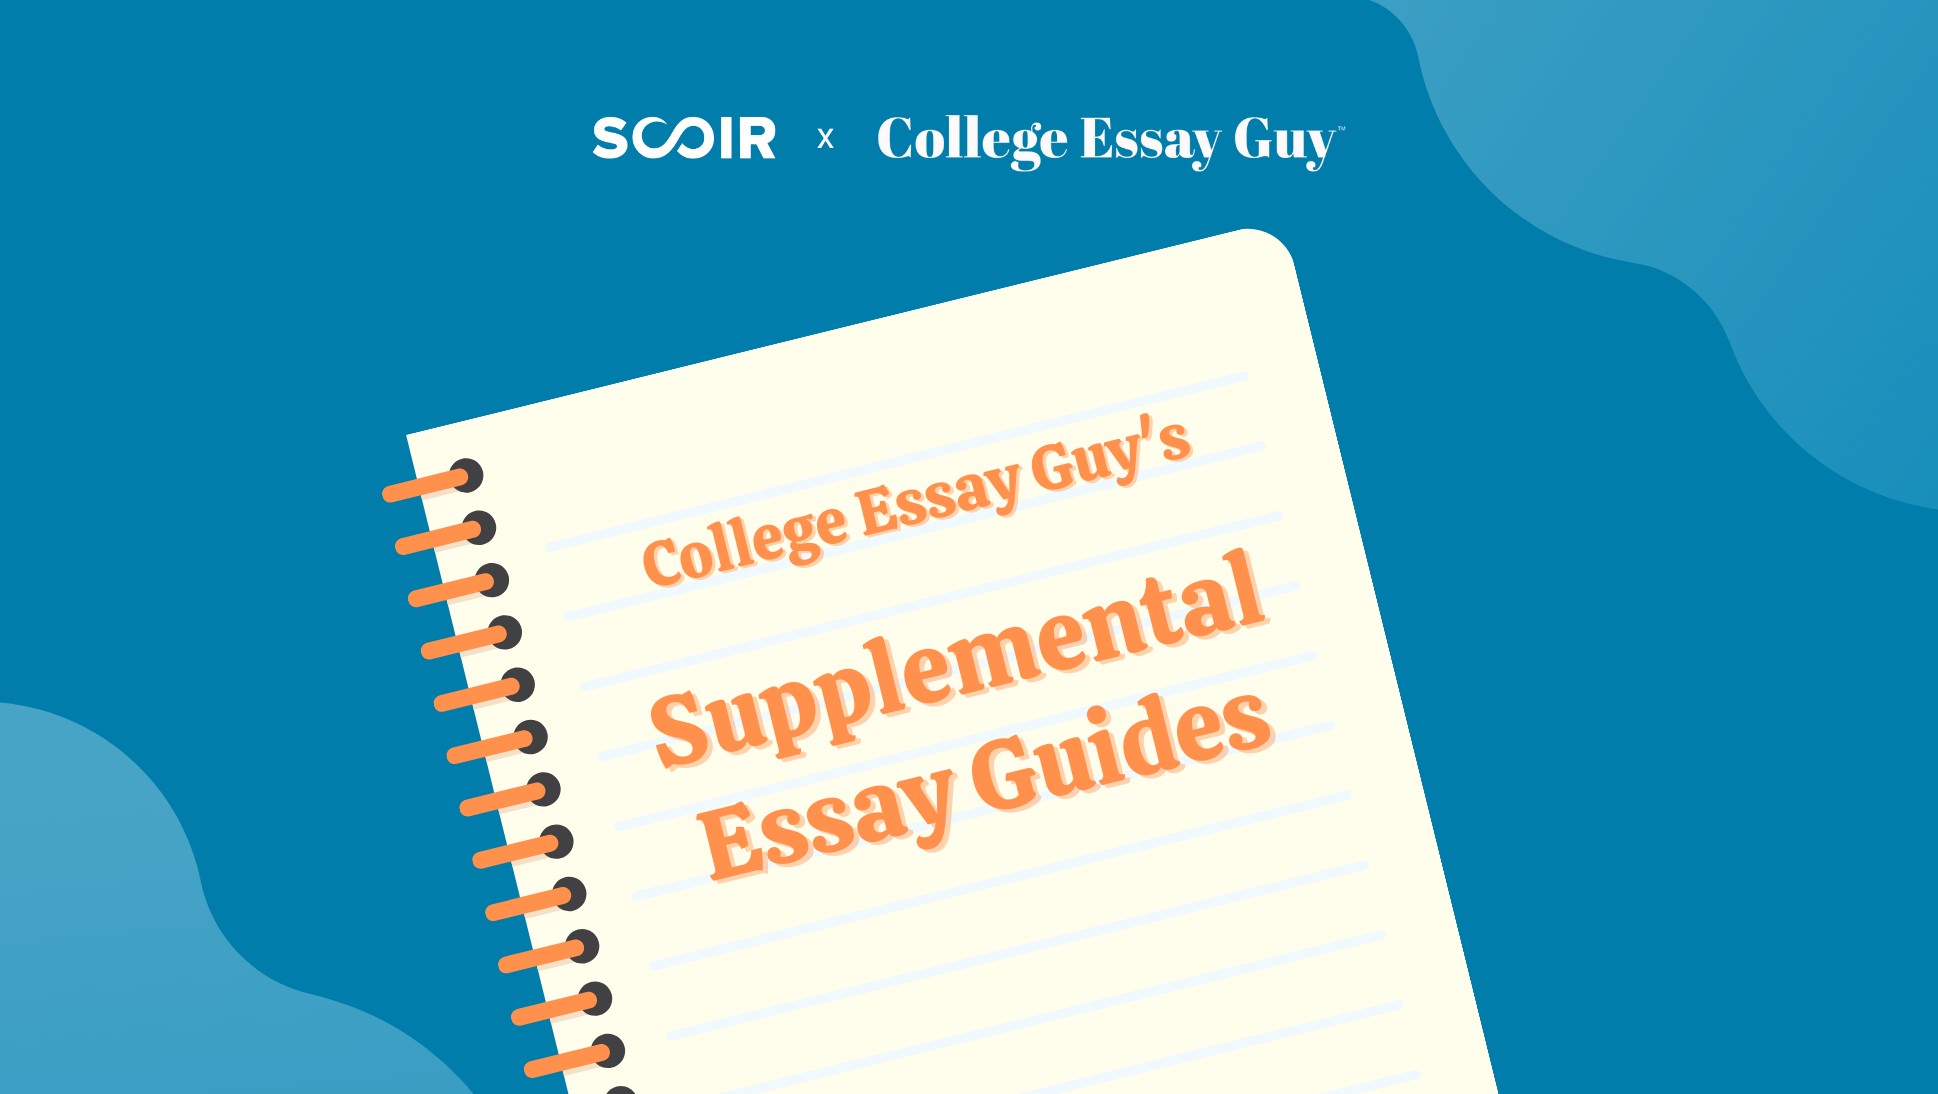 What is a Supplemental Essay + Supplemental Essay Guides from College Essay Guy - notebook with supplemented essay guides from College Essay Guy